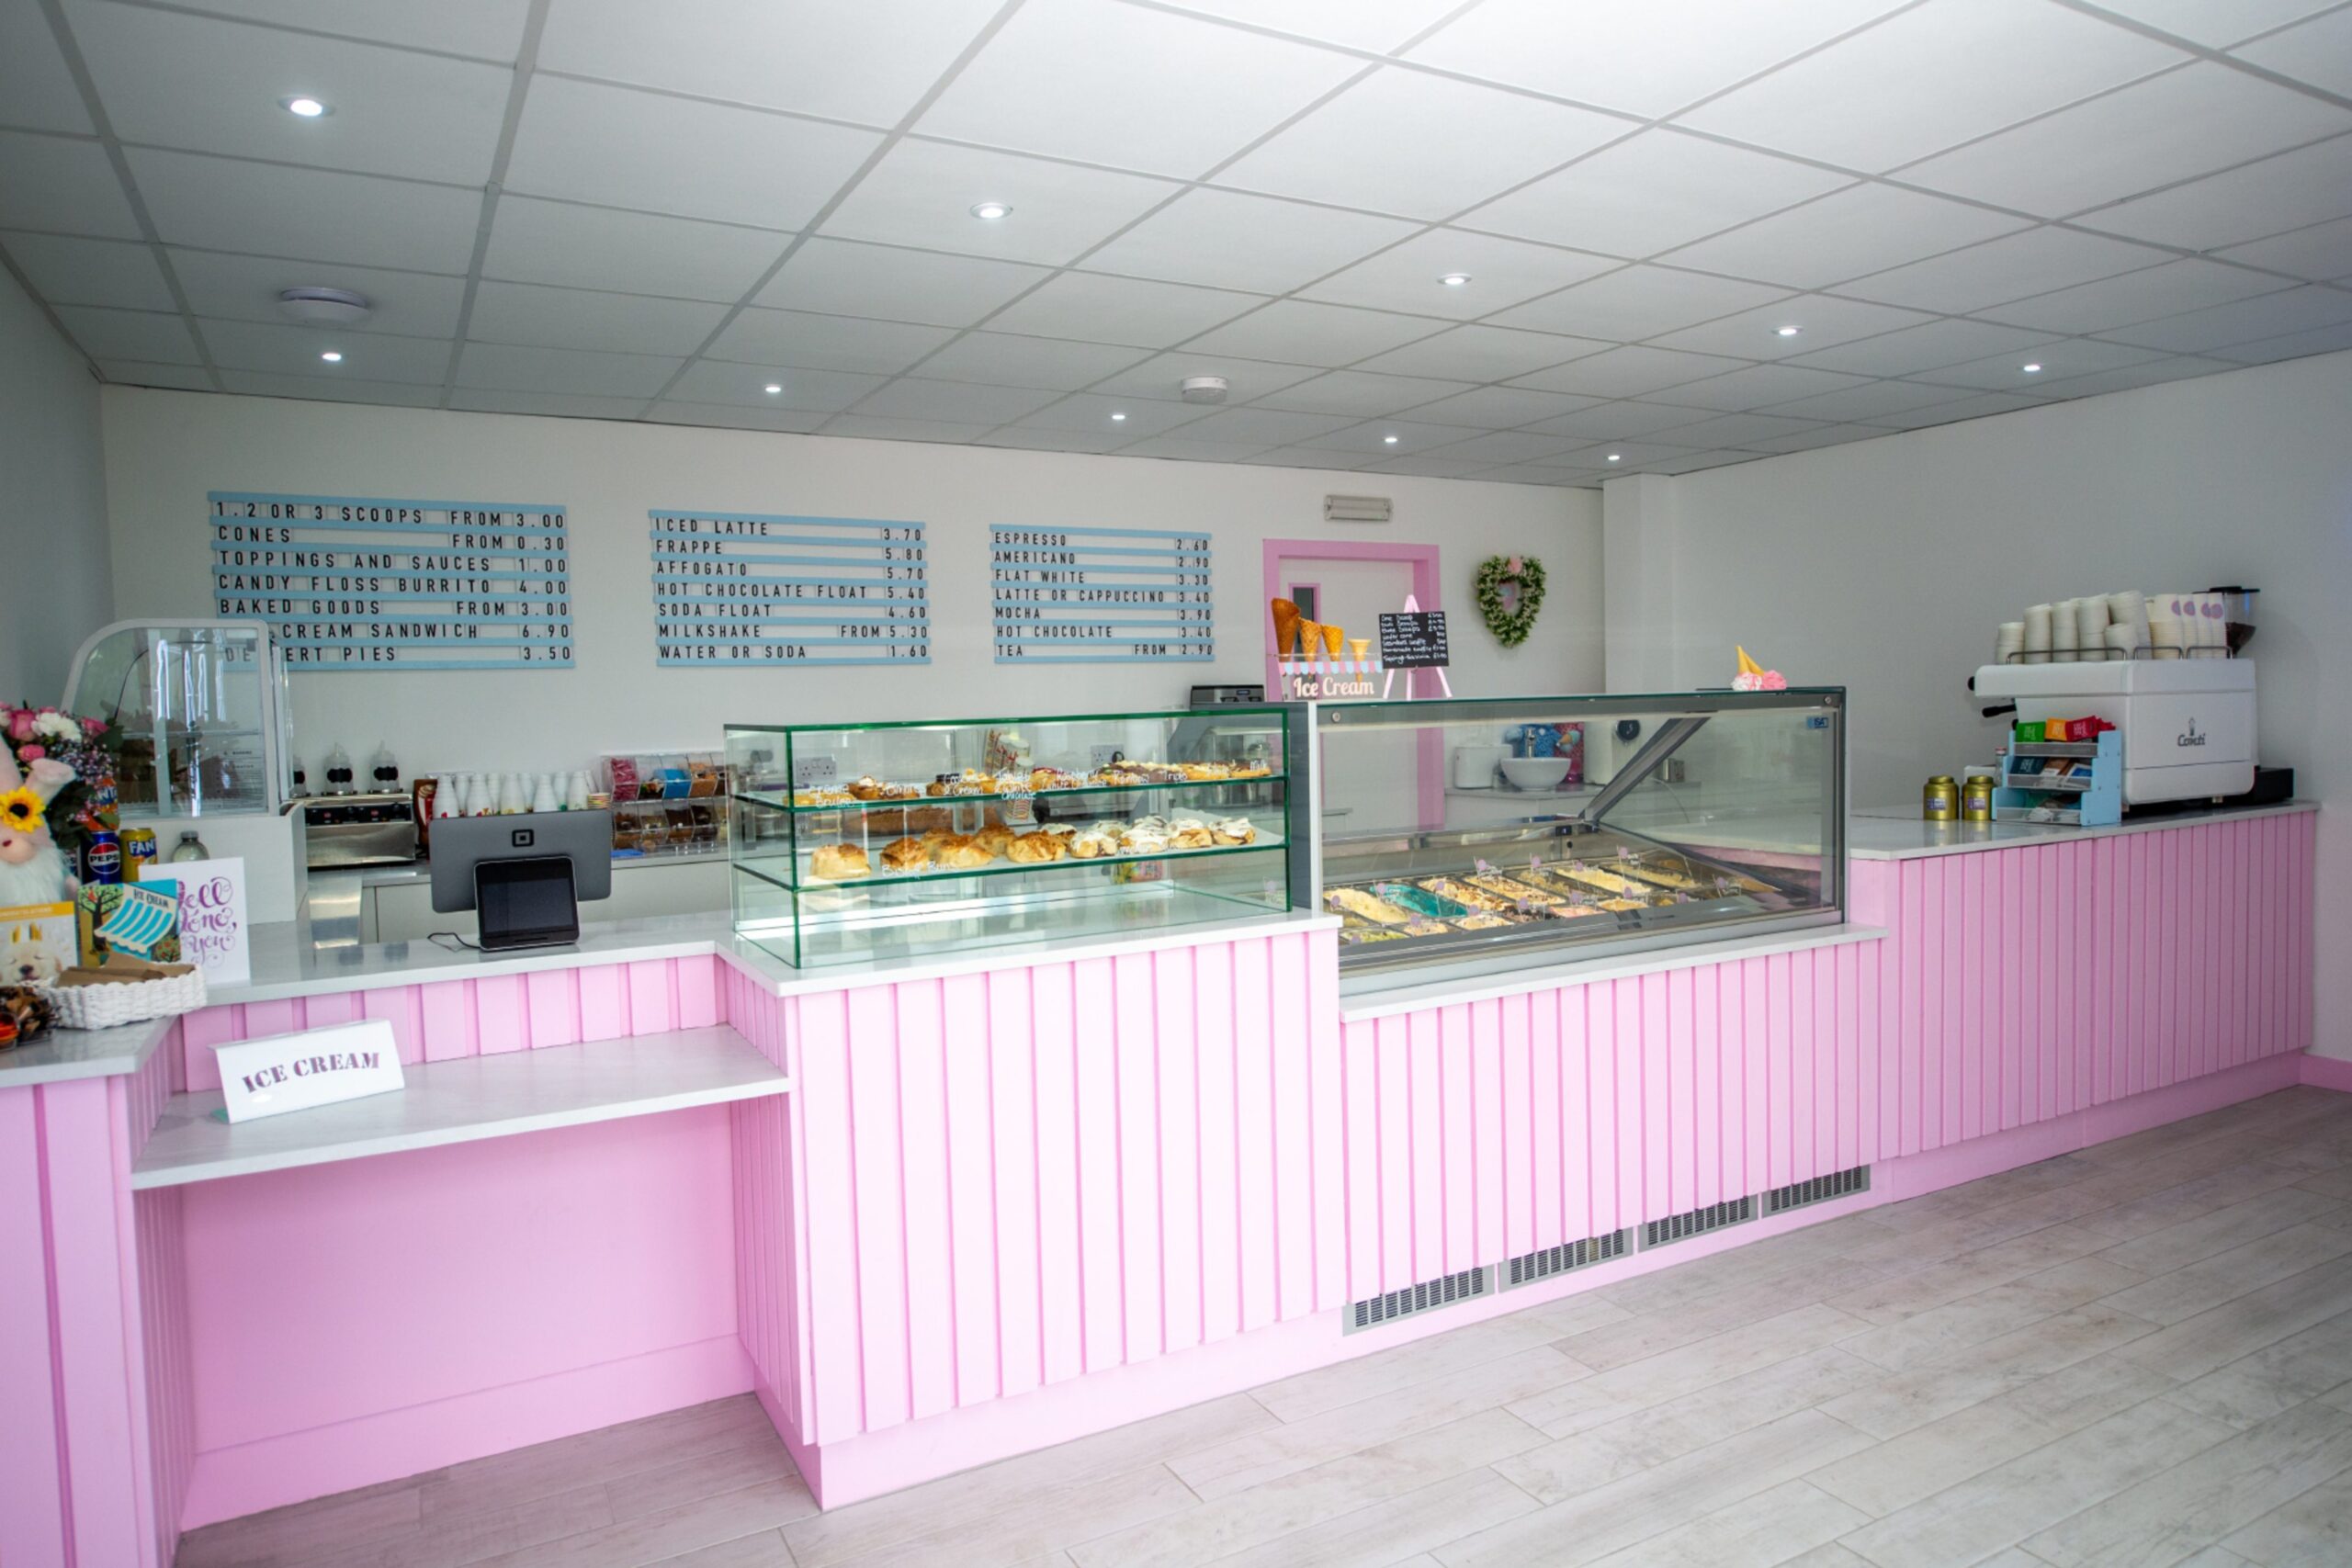 Inside the new Portlethen ice cream parlour.